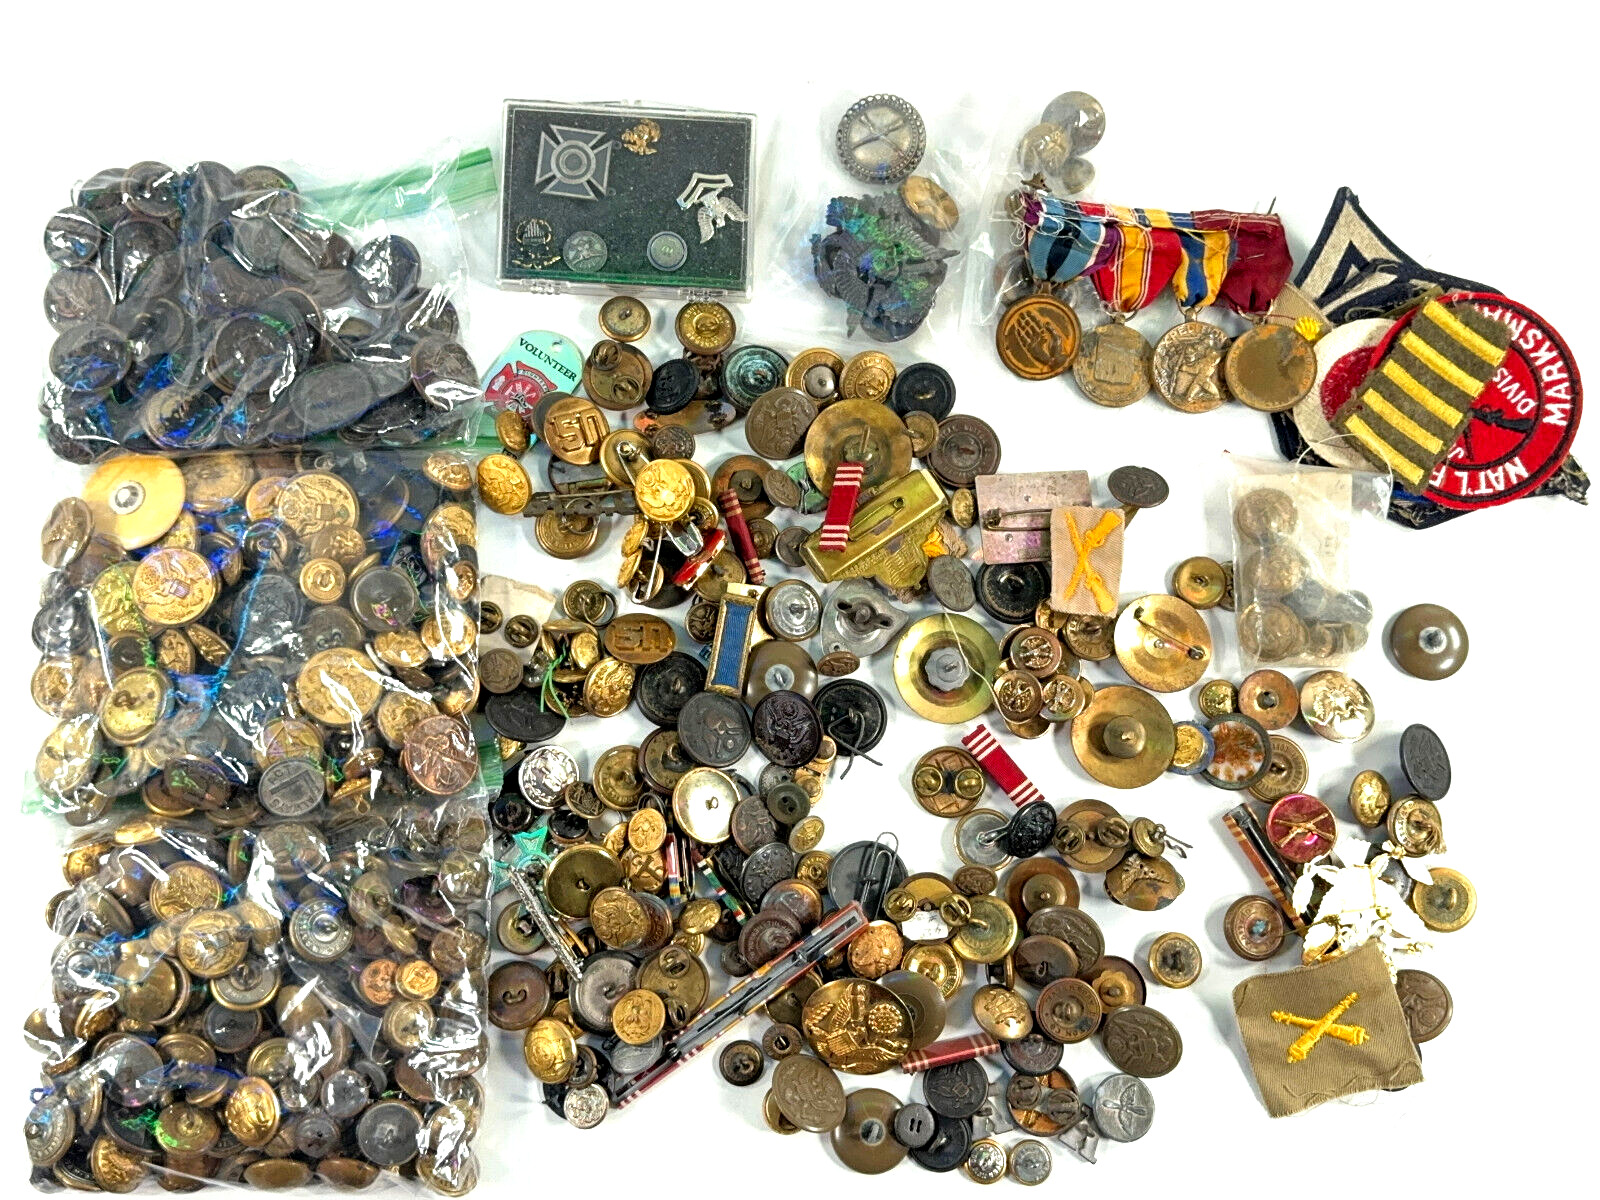 HUGE (500+) Pins Buttons Medals Patches WW1 WW2 army navy military KOREA Vietnam